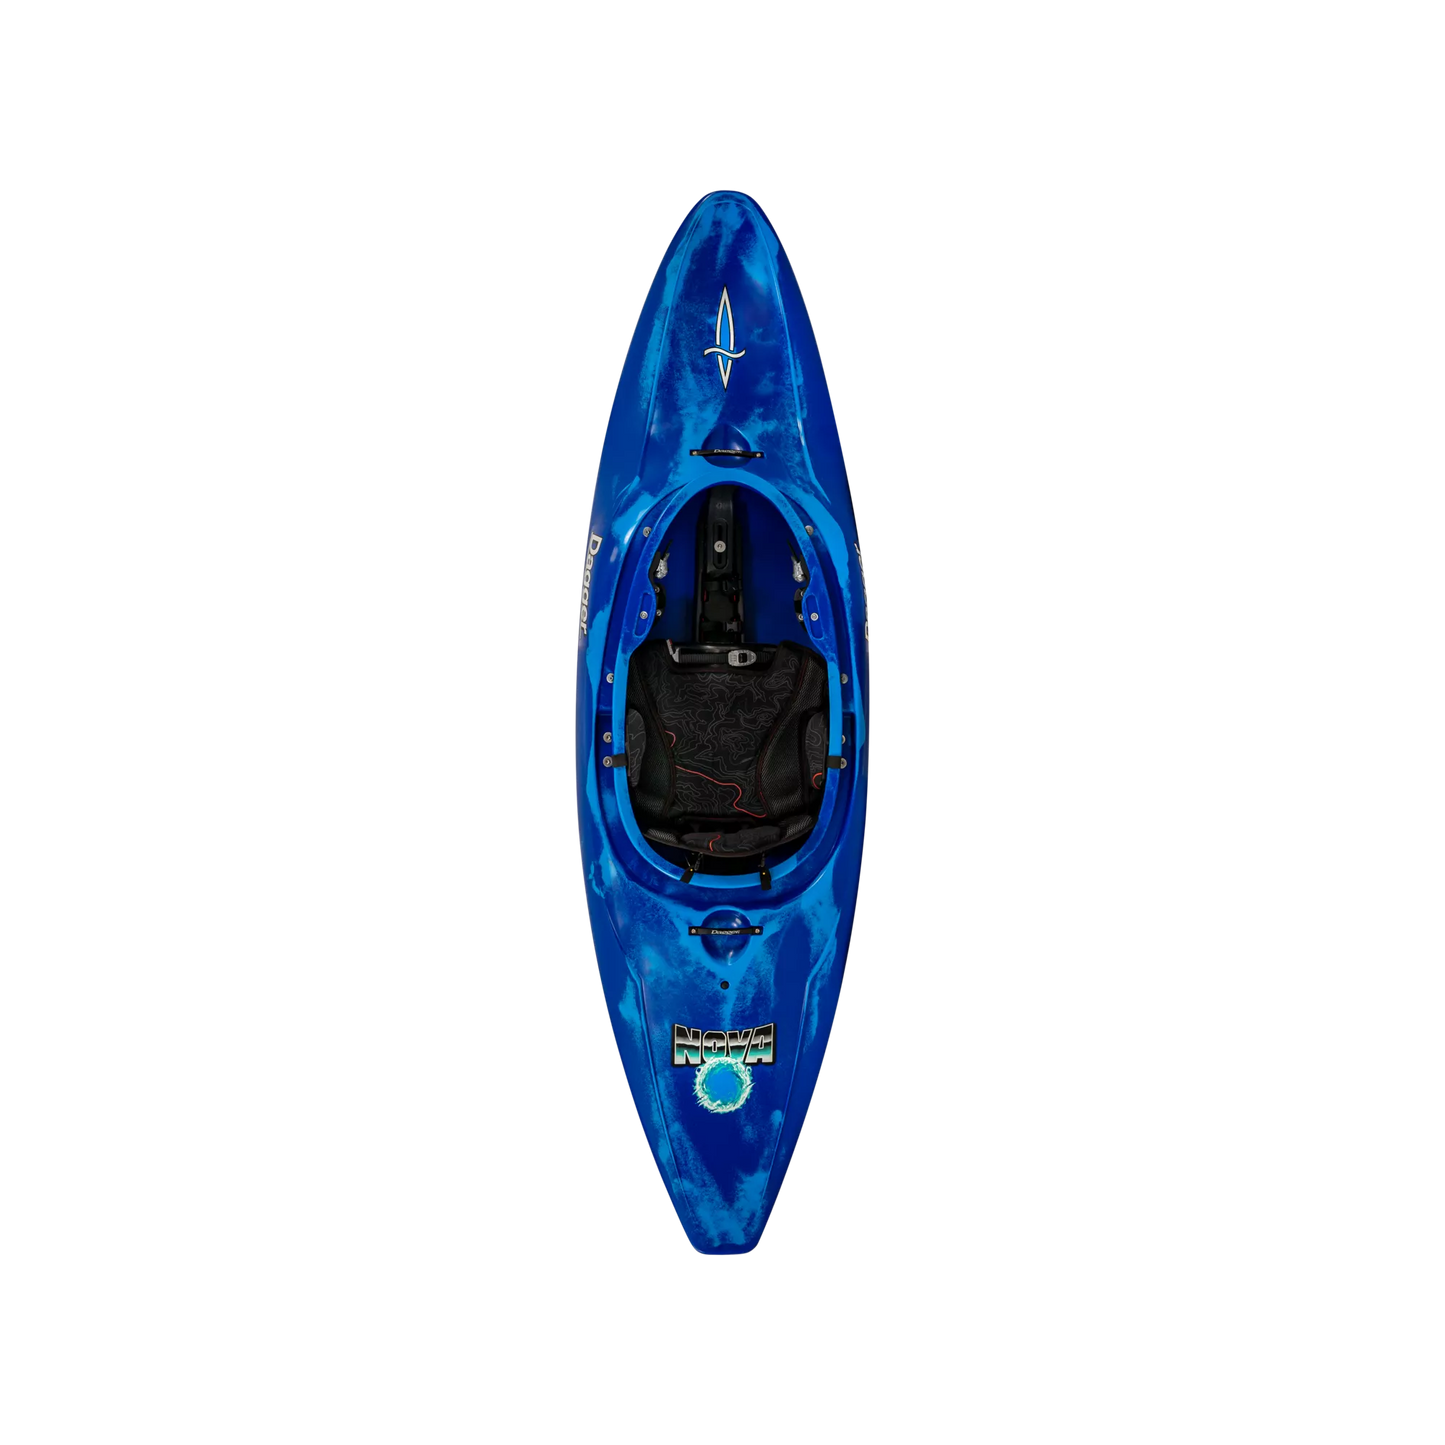 Blue Smoke full slice river play whitewater kayak.The Dagger Nova and Supernova are uniquely designed for 2 different paddler size ranges so you can saddle up, slice, surf, and spin your way to hours of amusement. 